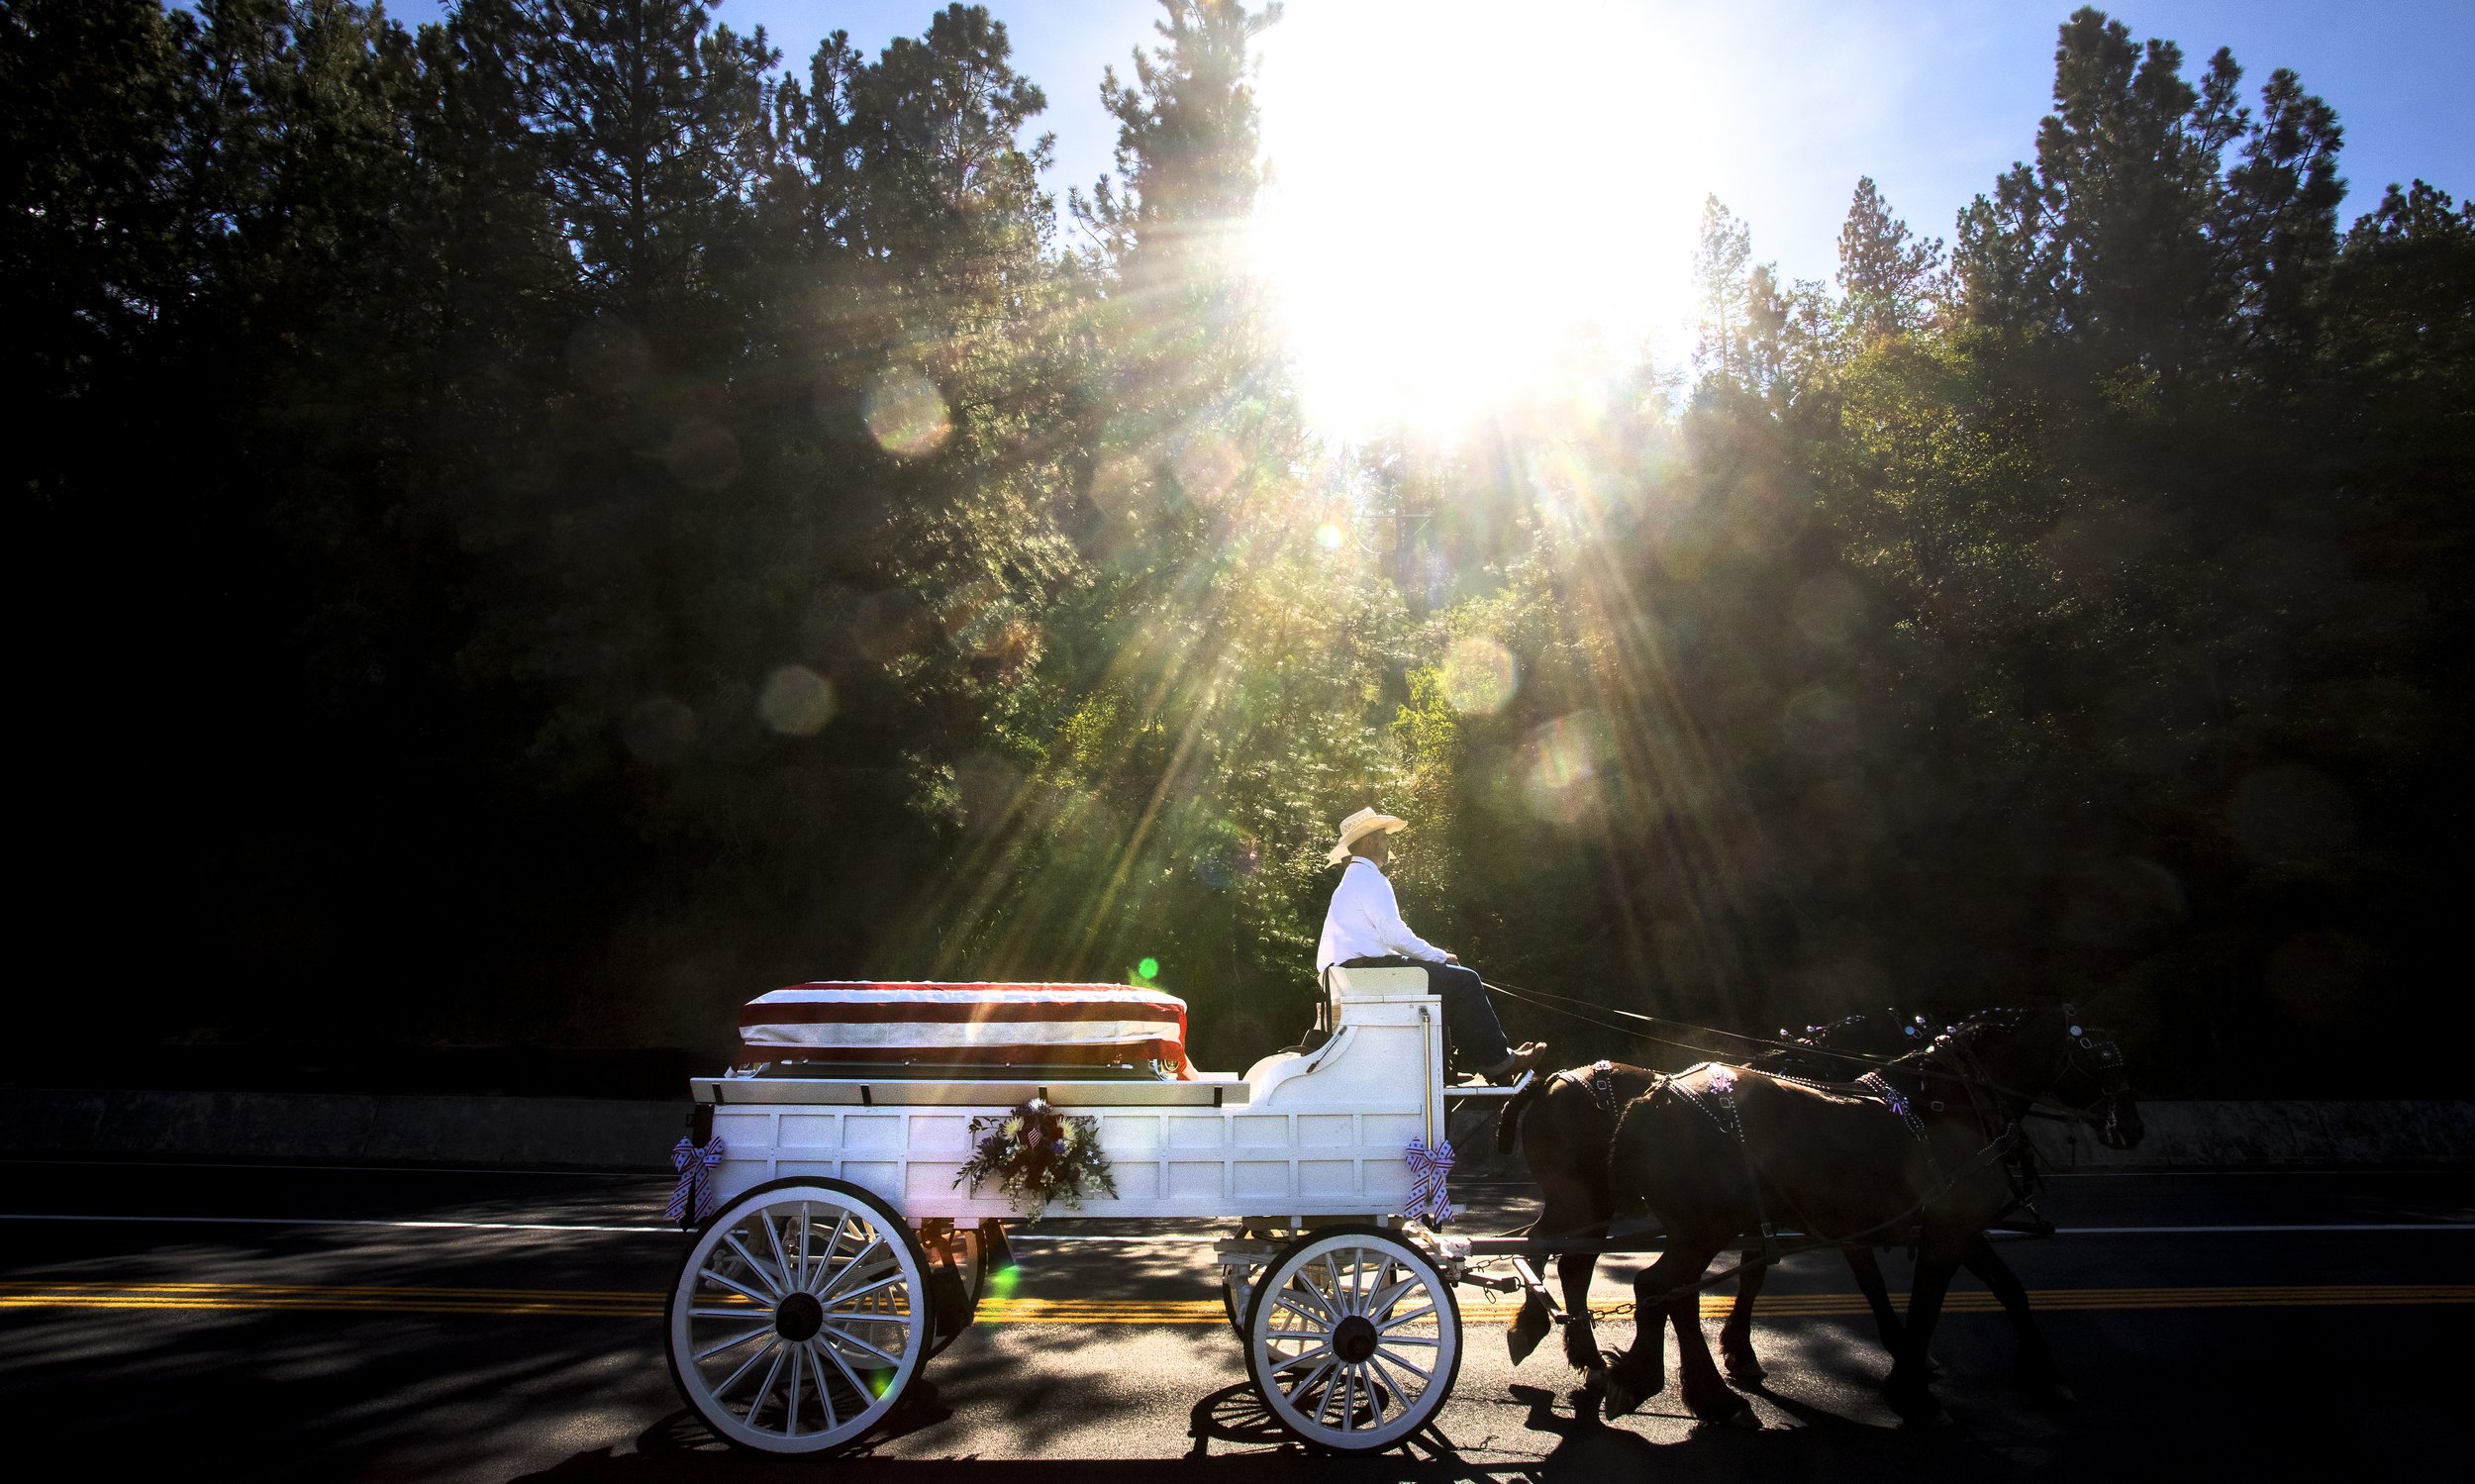  Tom Hayes is carried in horse drawn carriage to his final resting place in the Orofino Cemetery on Friday. Tom, 41, died on July 21 in a helicopter crash while assisting firefighters in the Moose Fire, near Salmon, Idaho. His father, Tim Hayes, said